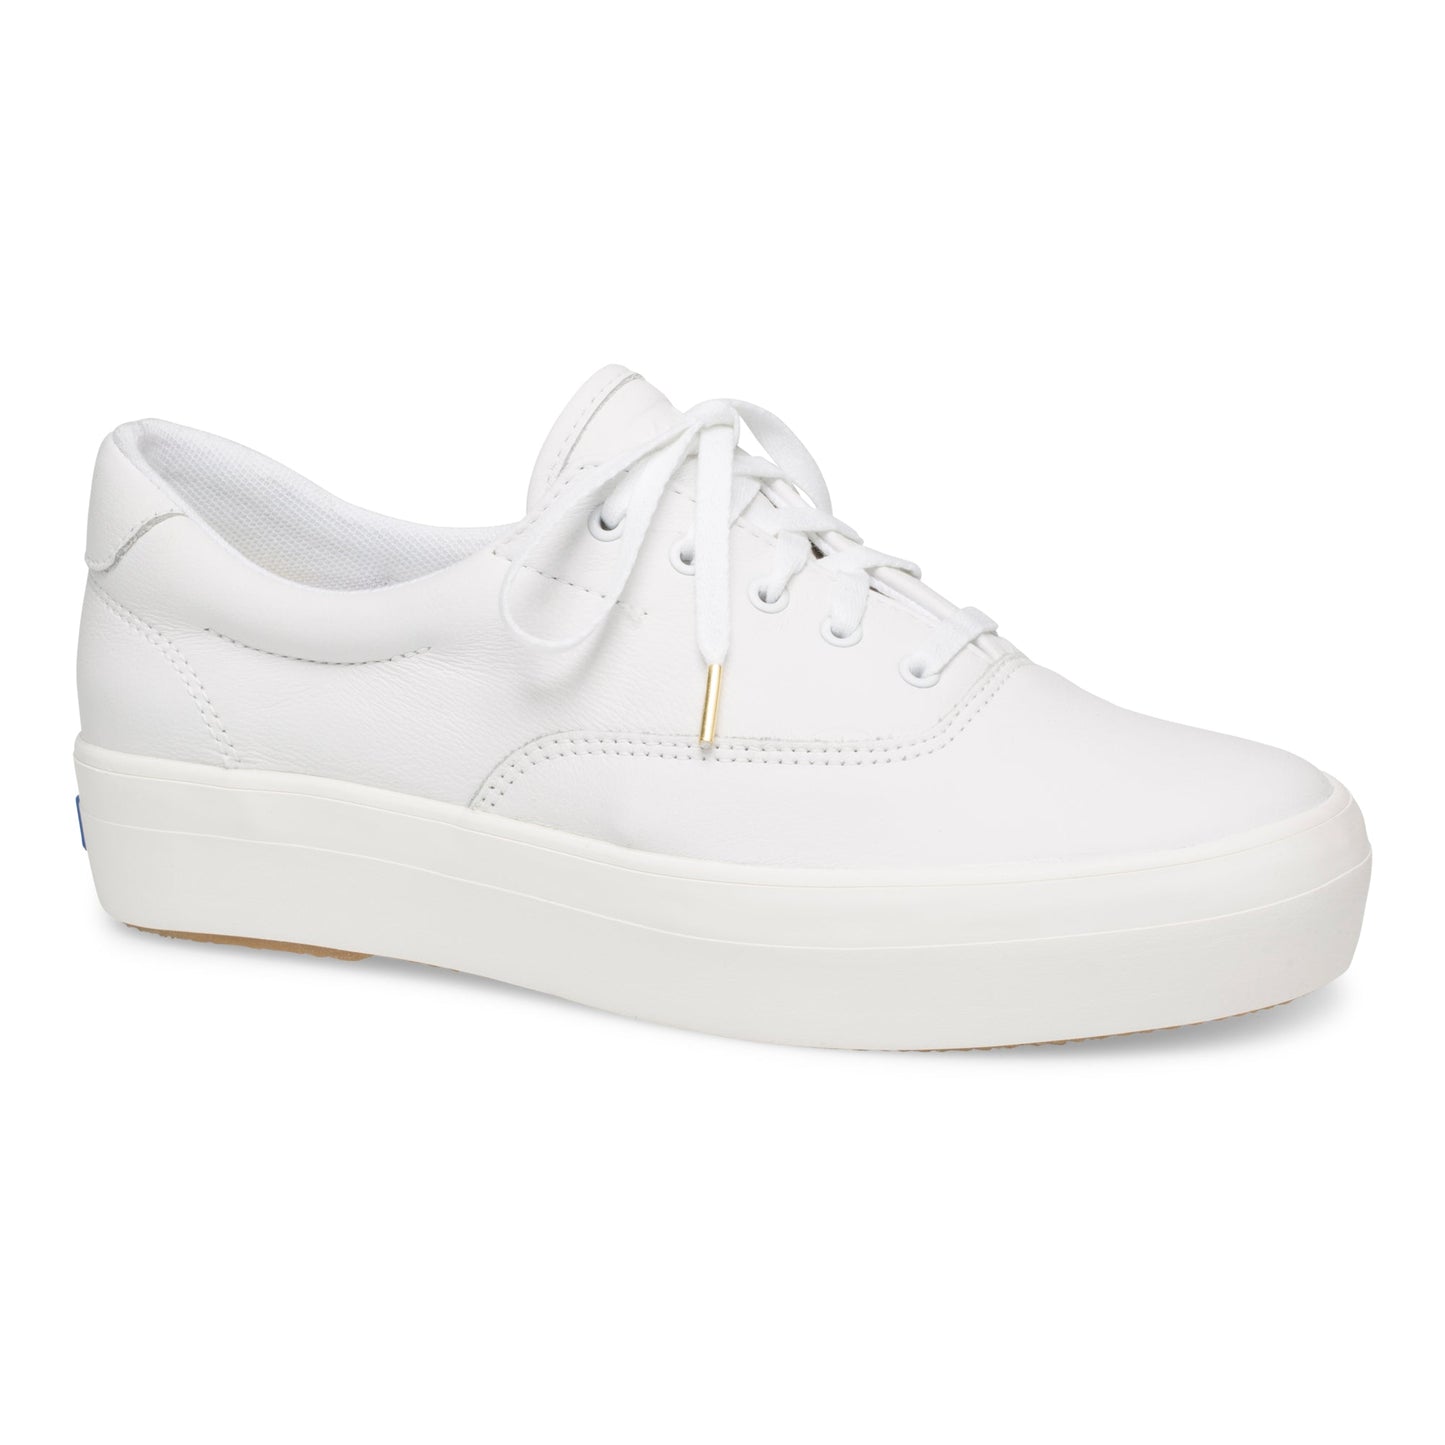 Keds Women's Rise Leather White